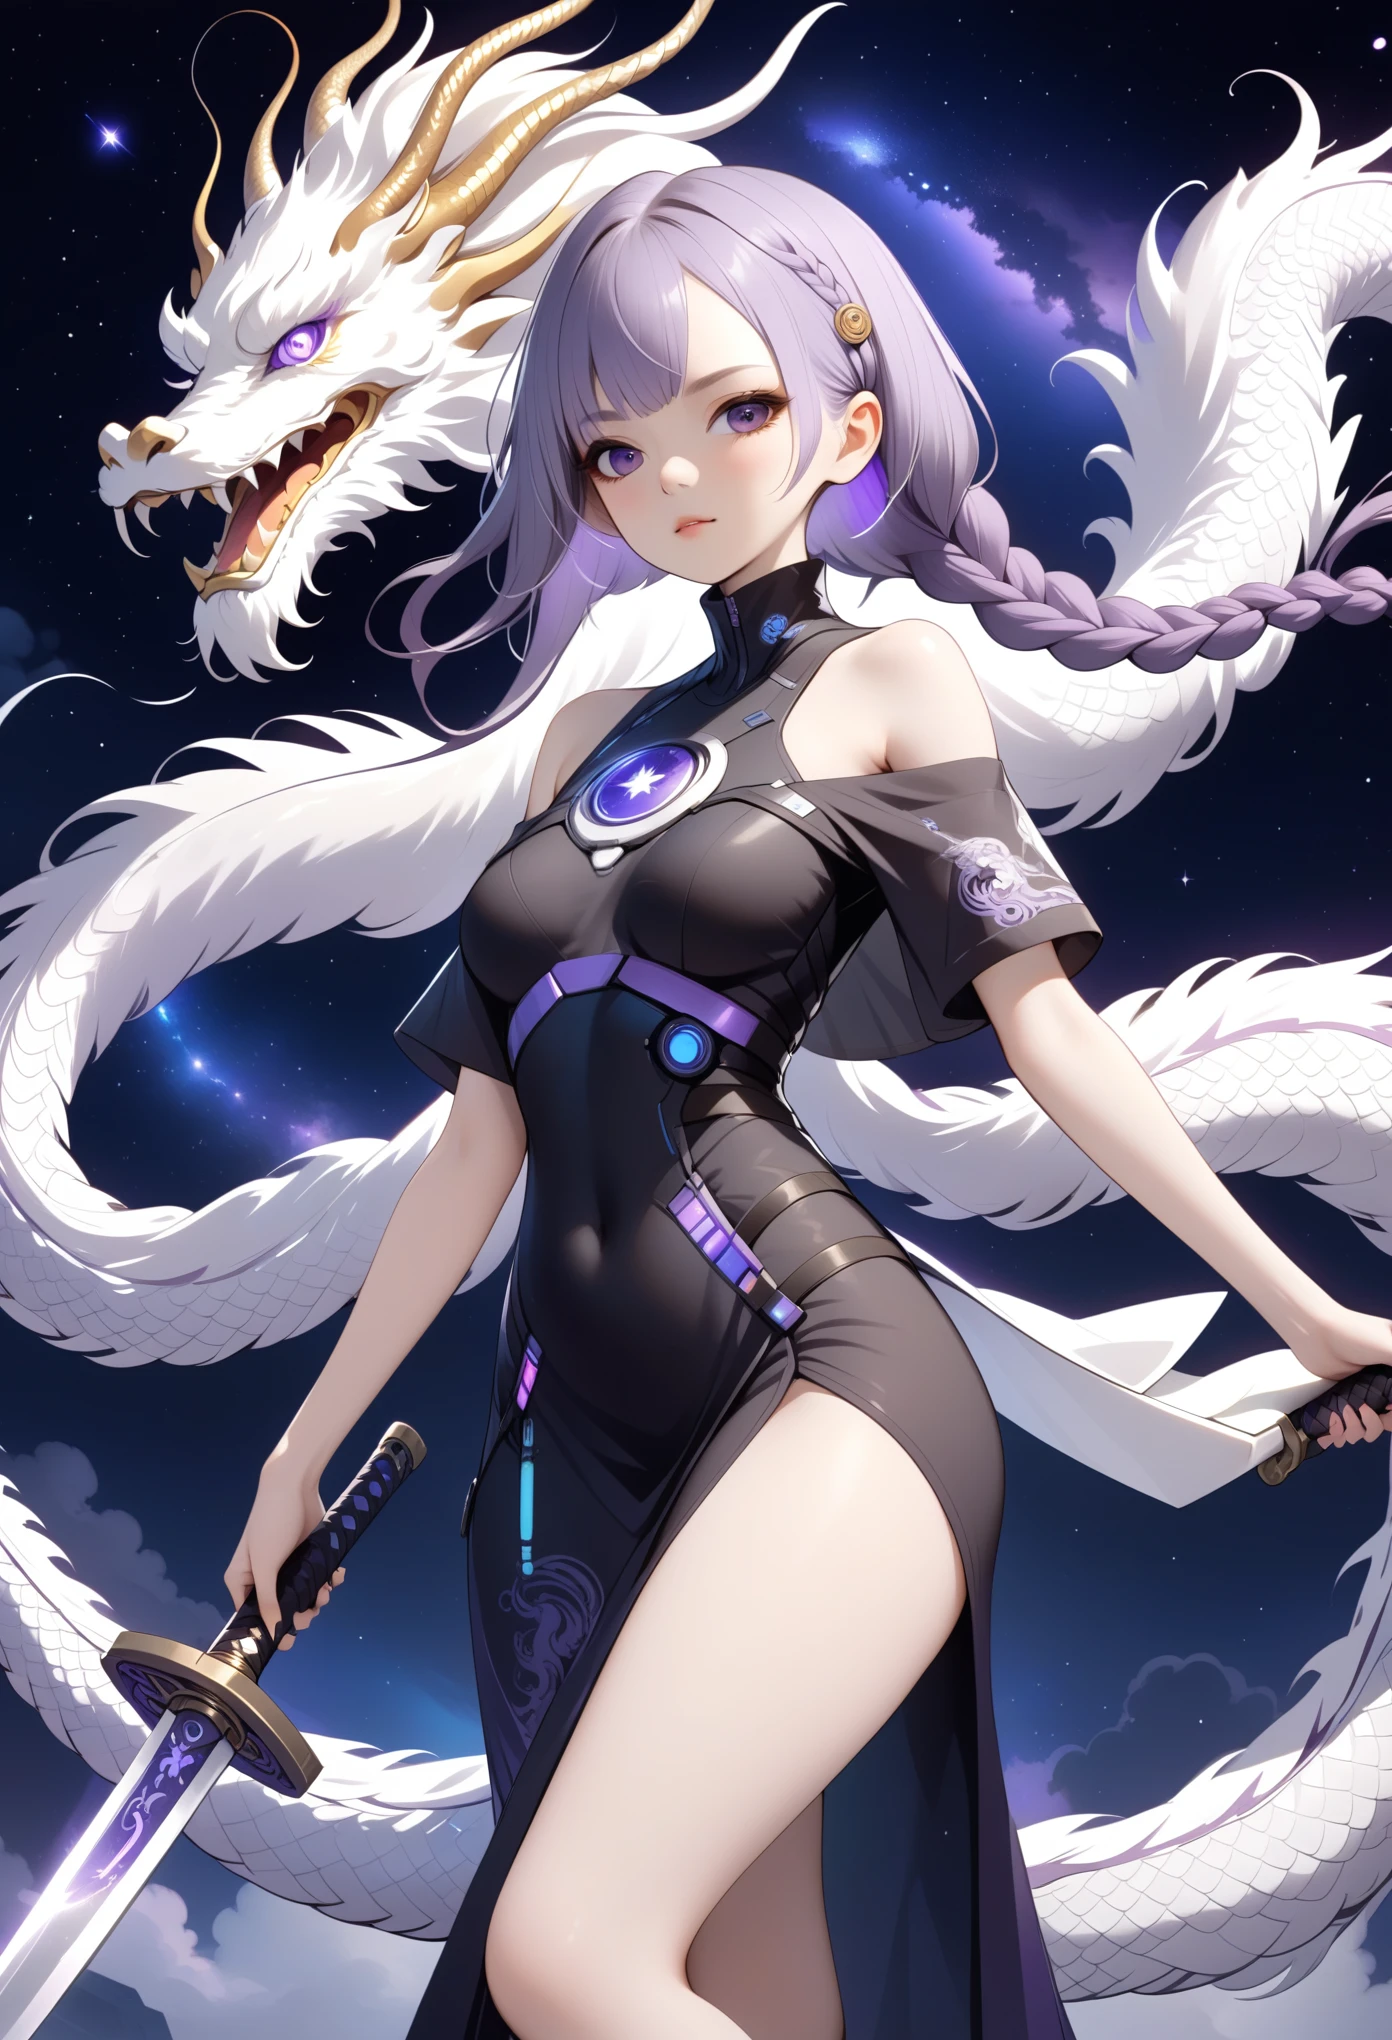 A cyberpunk Chinese mythological girl with white-purple braided hair, wearing a high-collar off-shoulder short-sleeved dress with a high slit, holding a long sword, sensual, Chinese dragon, fluffy clouds, starry sky